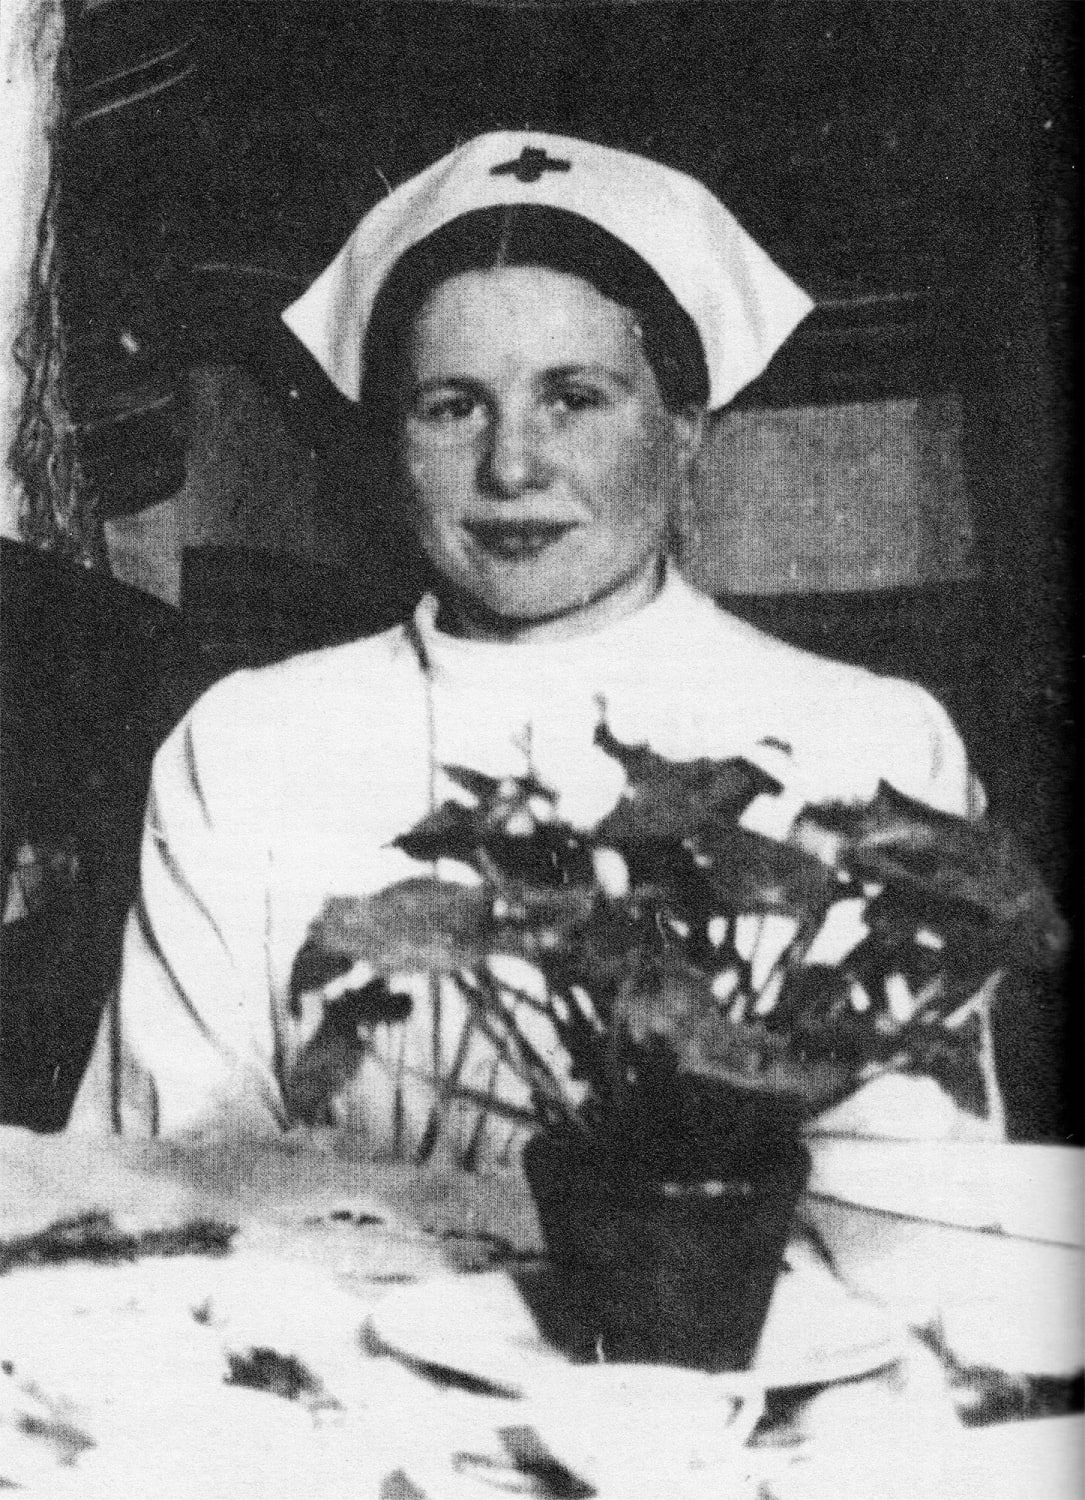 Polish nurse, humanitarian and social worker Irena Sendler who saved 2,500 Jewish children from Warsaw ghetto during the WW2